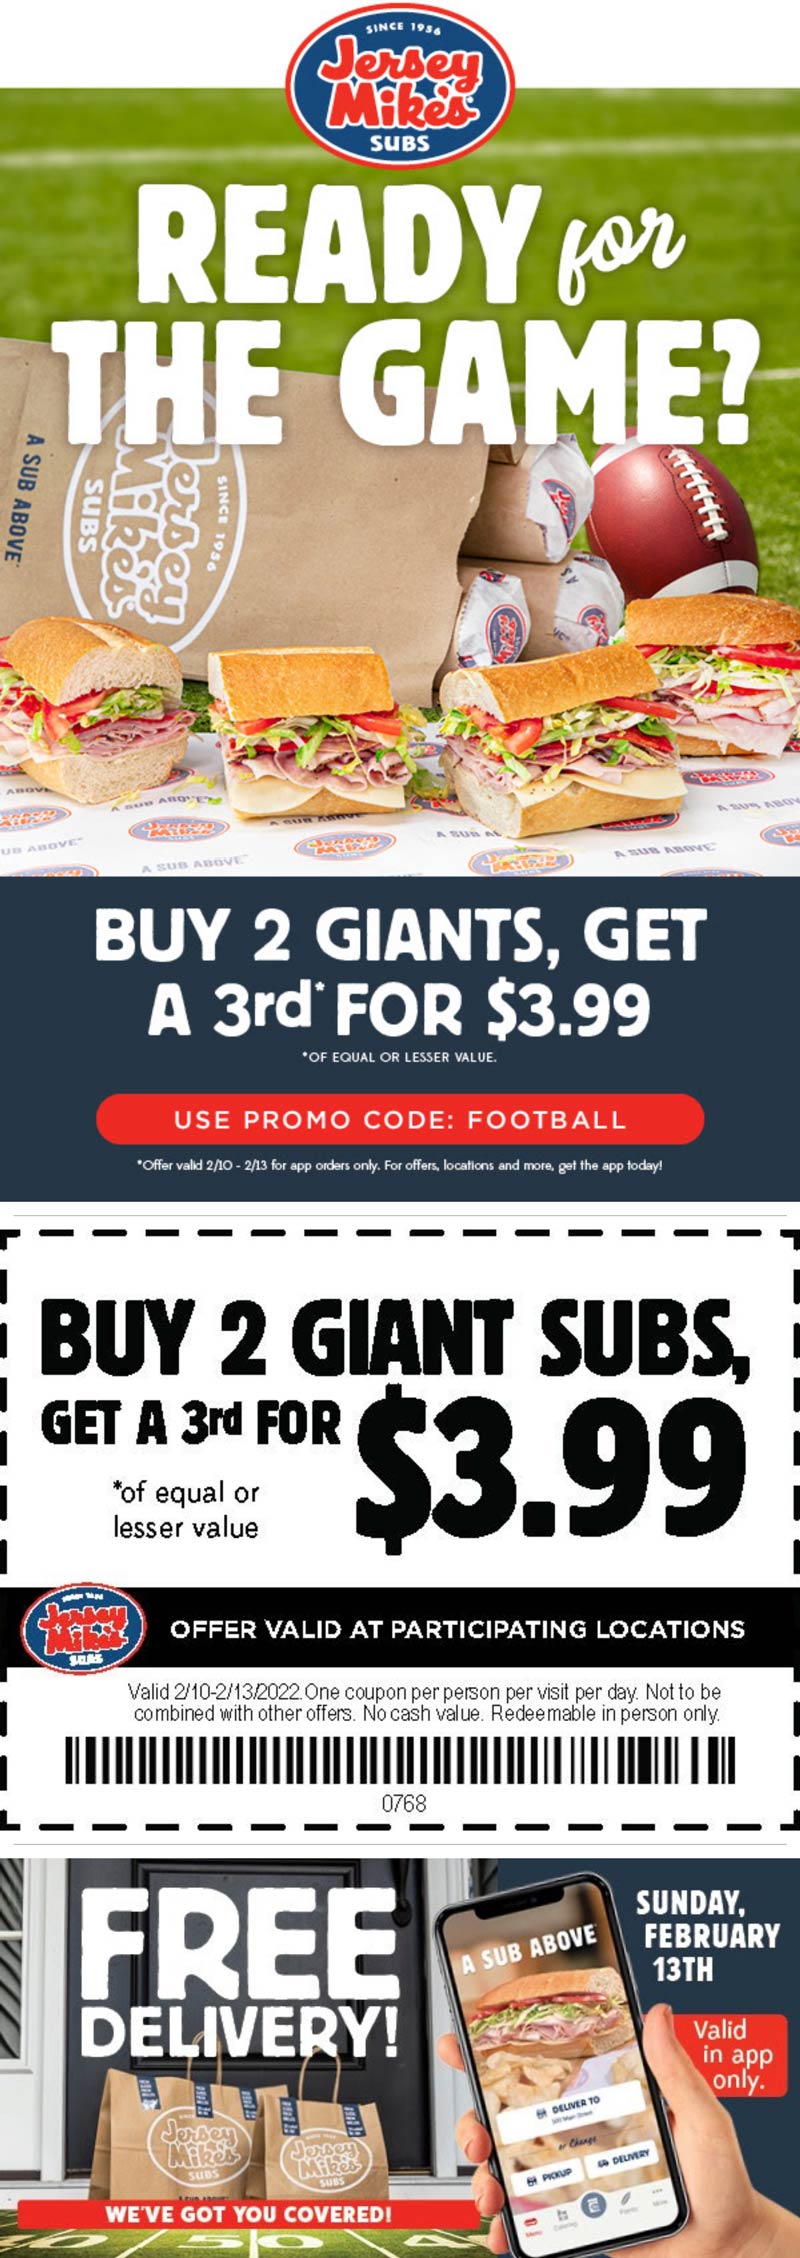 Jersey Mikes restaurants Coupon  3rd giant sandwich for $4 at Jersey Mikes via promo code FOOTBALL #jerseymikes 